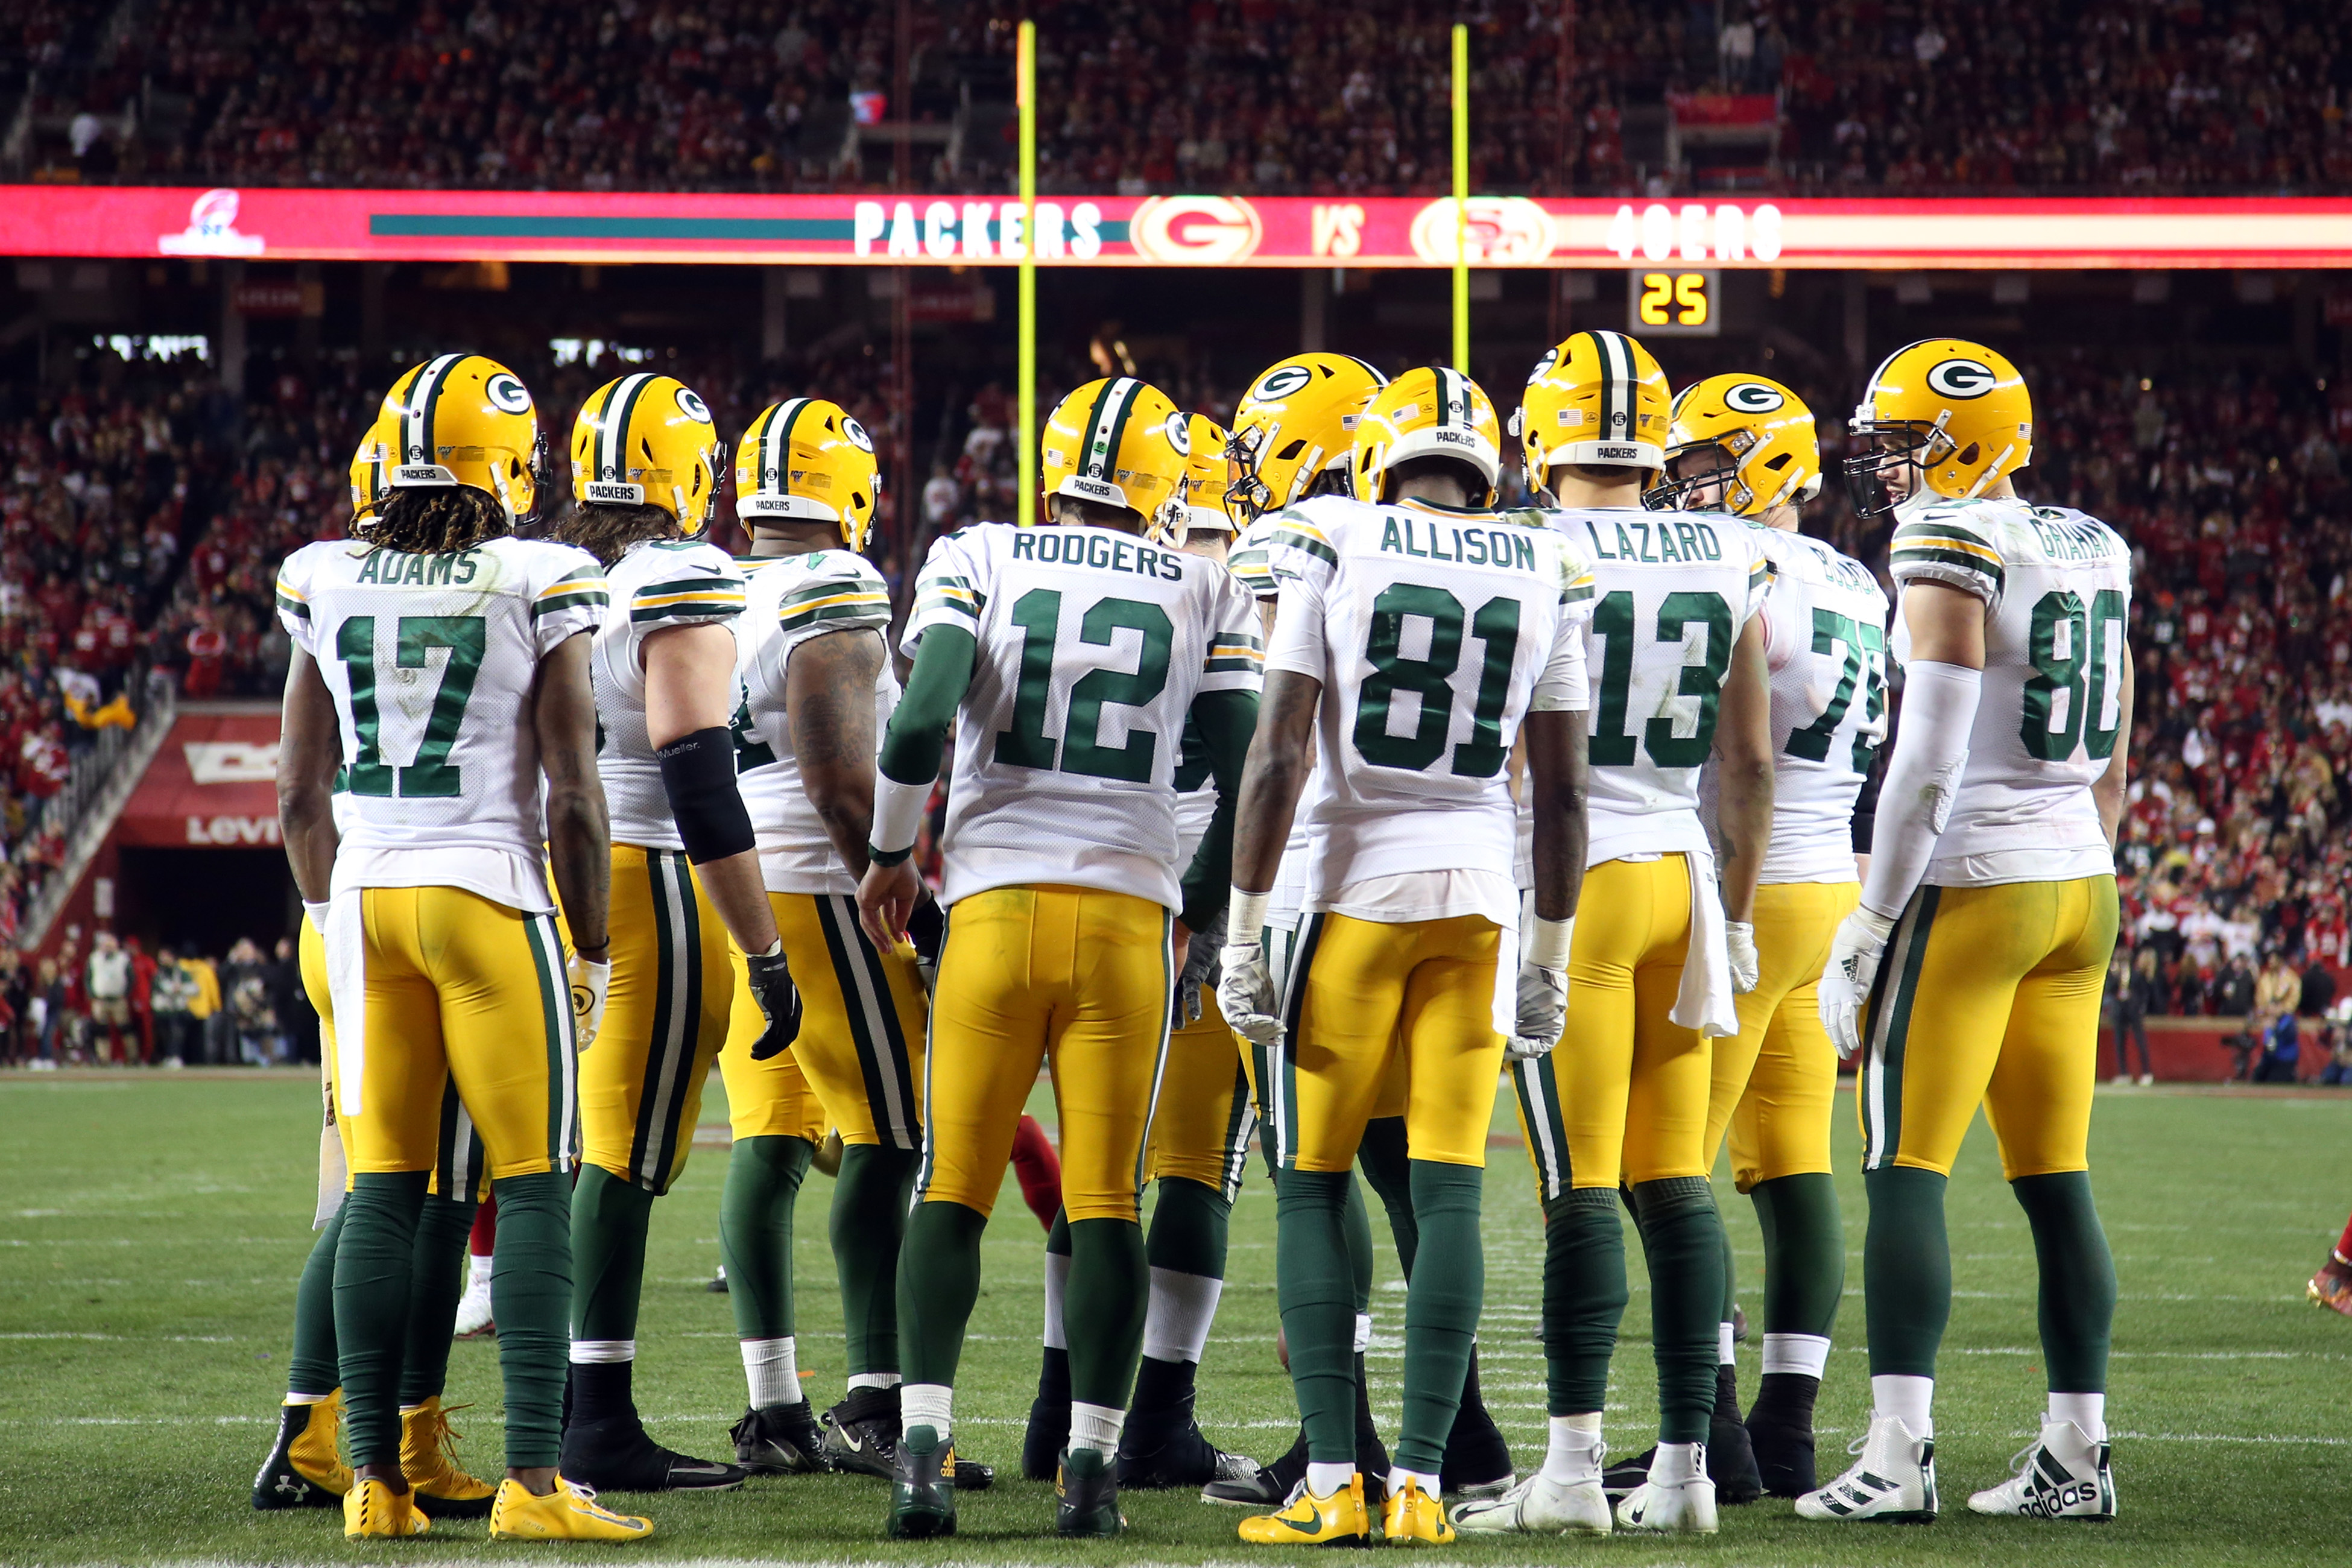 NFL: JAN 19 NFC Championship - Packers at 49ers